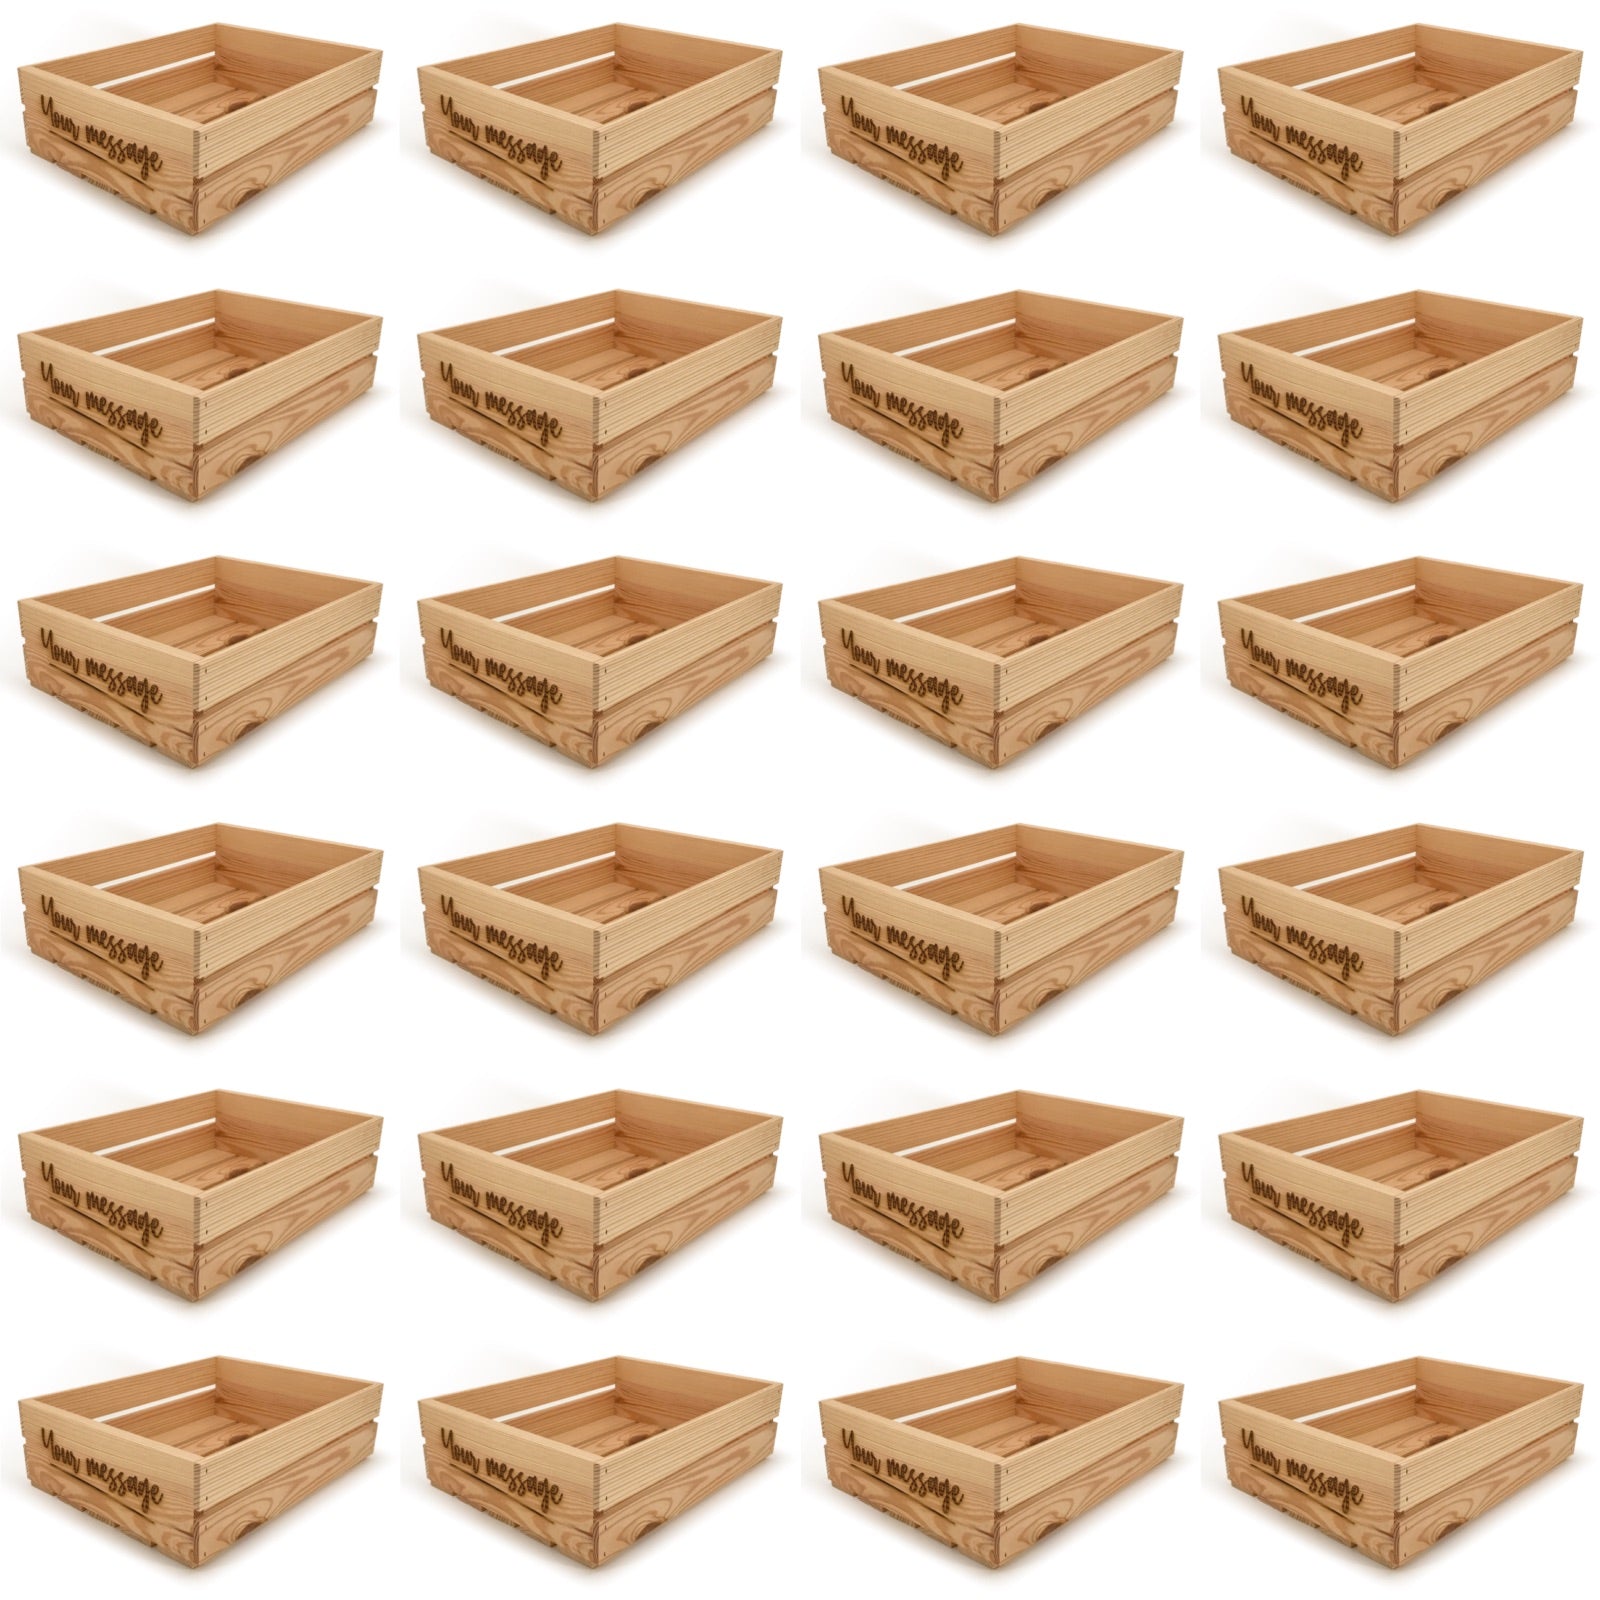 24 Small wooden crates with custom message 18x14x5.25, 6-WS-18-14-5.25-ST-NW-NL, 12-WS-18-14-5.25-ST-NW-NL, 24-WS-18-14-5.25-ST-NW-NL, 48-WS-18-14-5.25-ST-NW-NL, 96-WS-18-14-5.25-ST-NW-NL